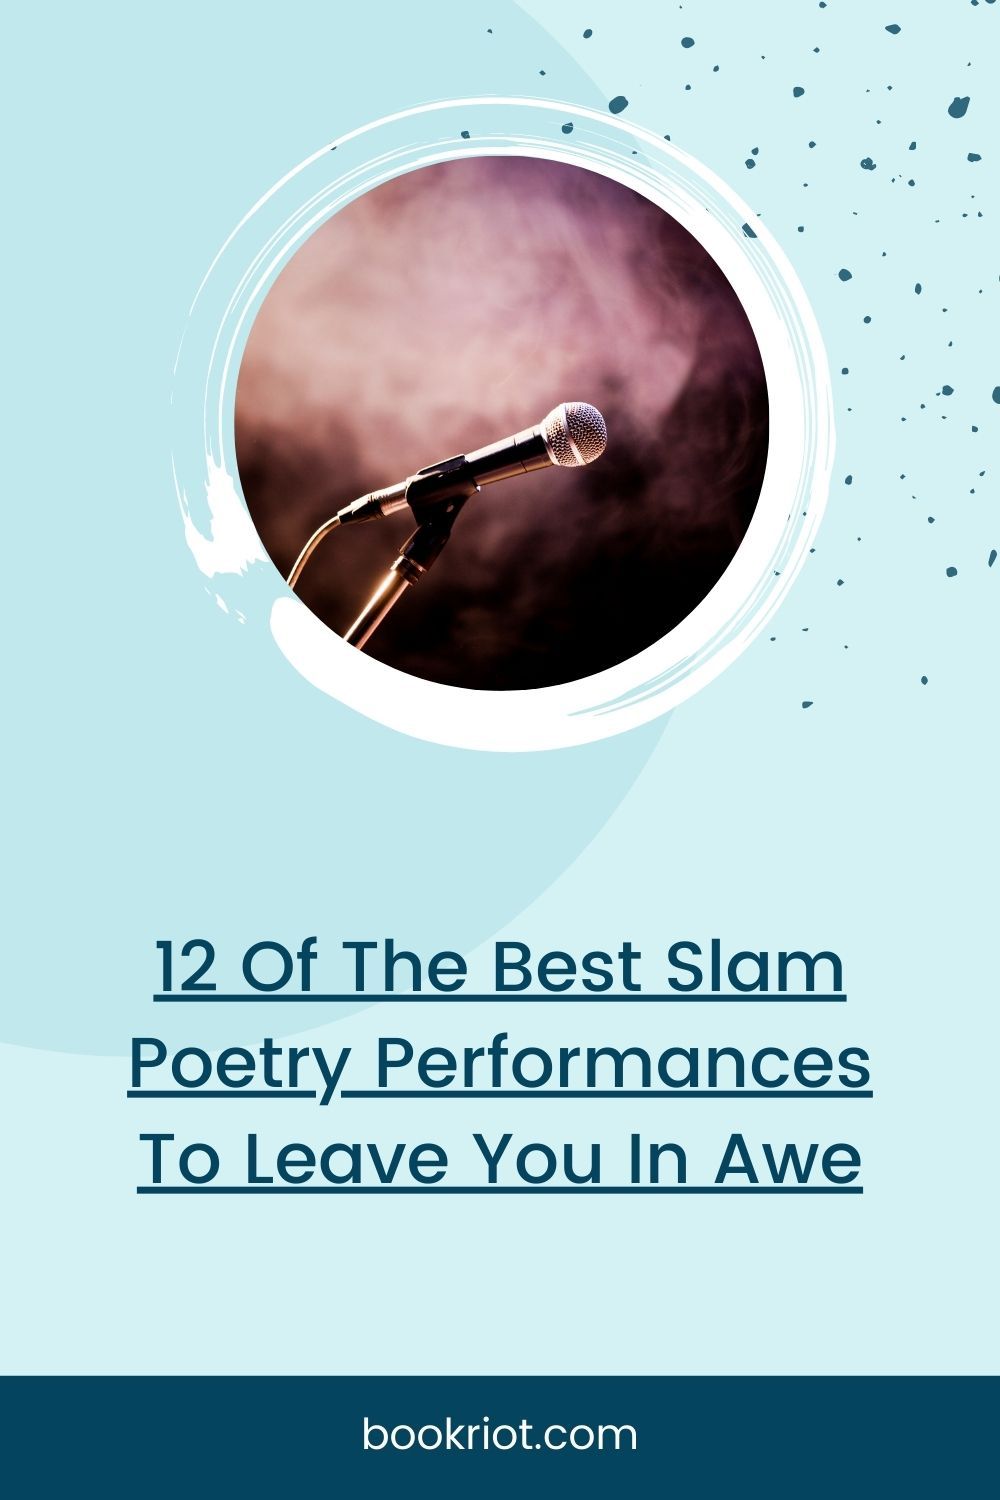 12 Of The Best Slam Poetry Performances To Leave You In Awe